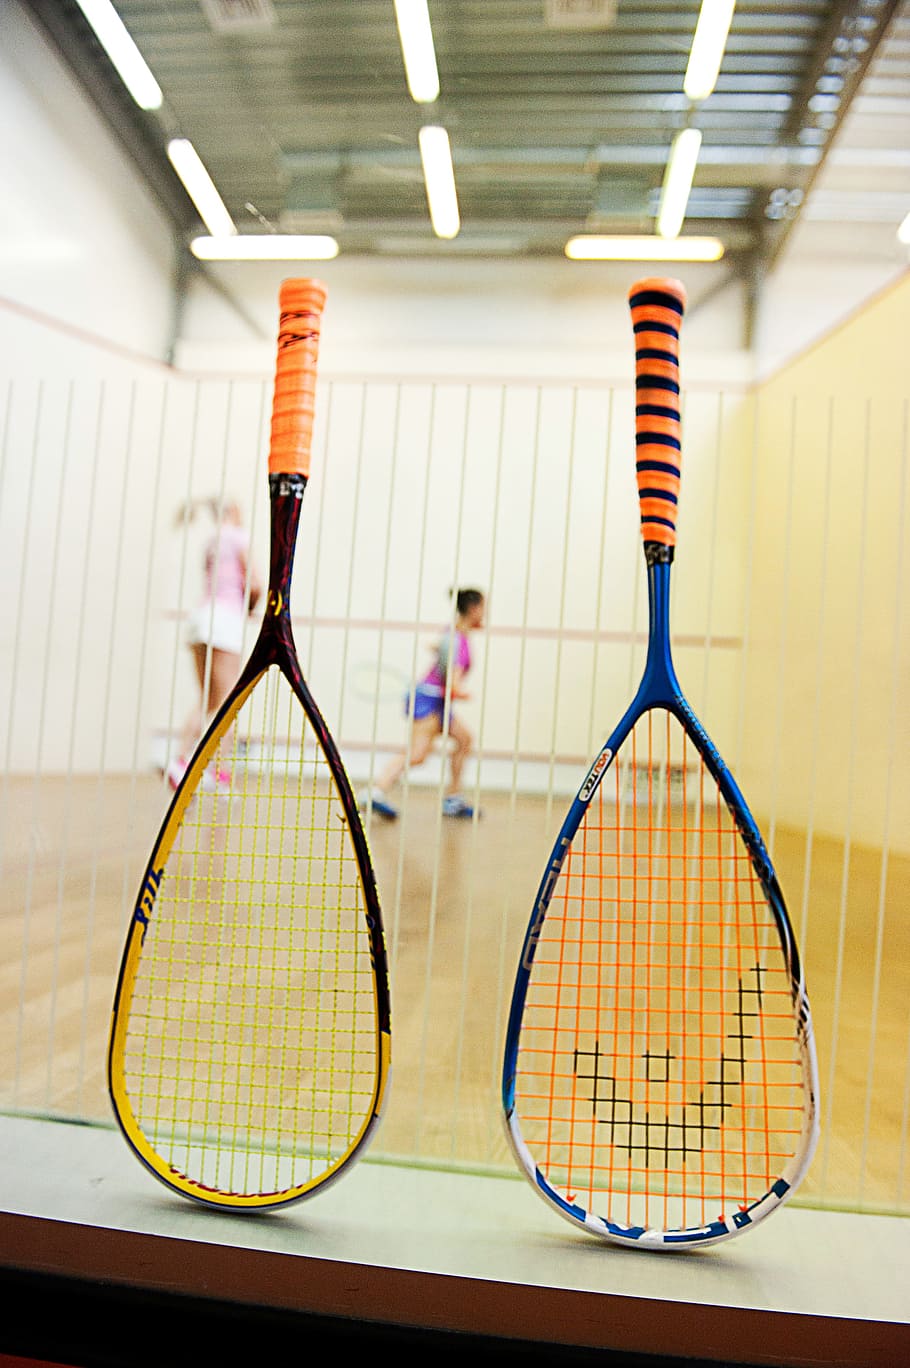 Squash rackets, lifestyle, objects, sport, tennis, competitive Sport, HD wallpaper